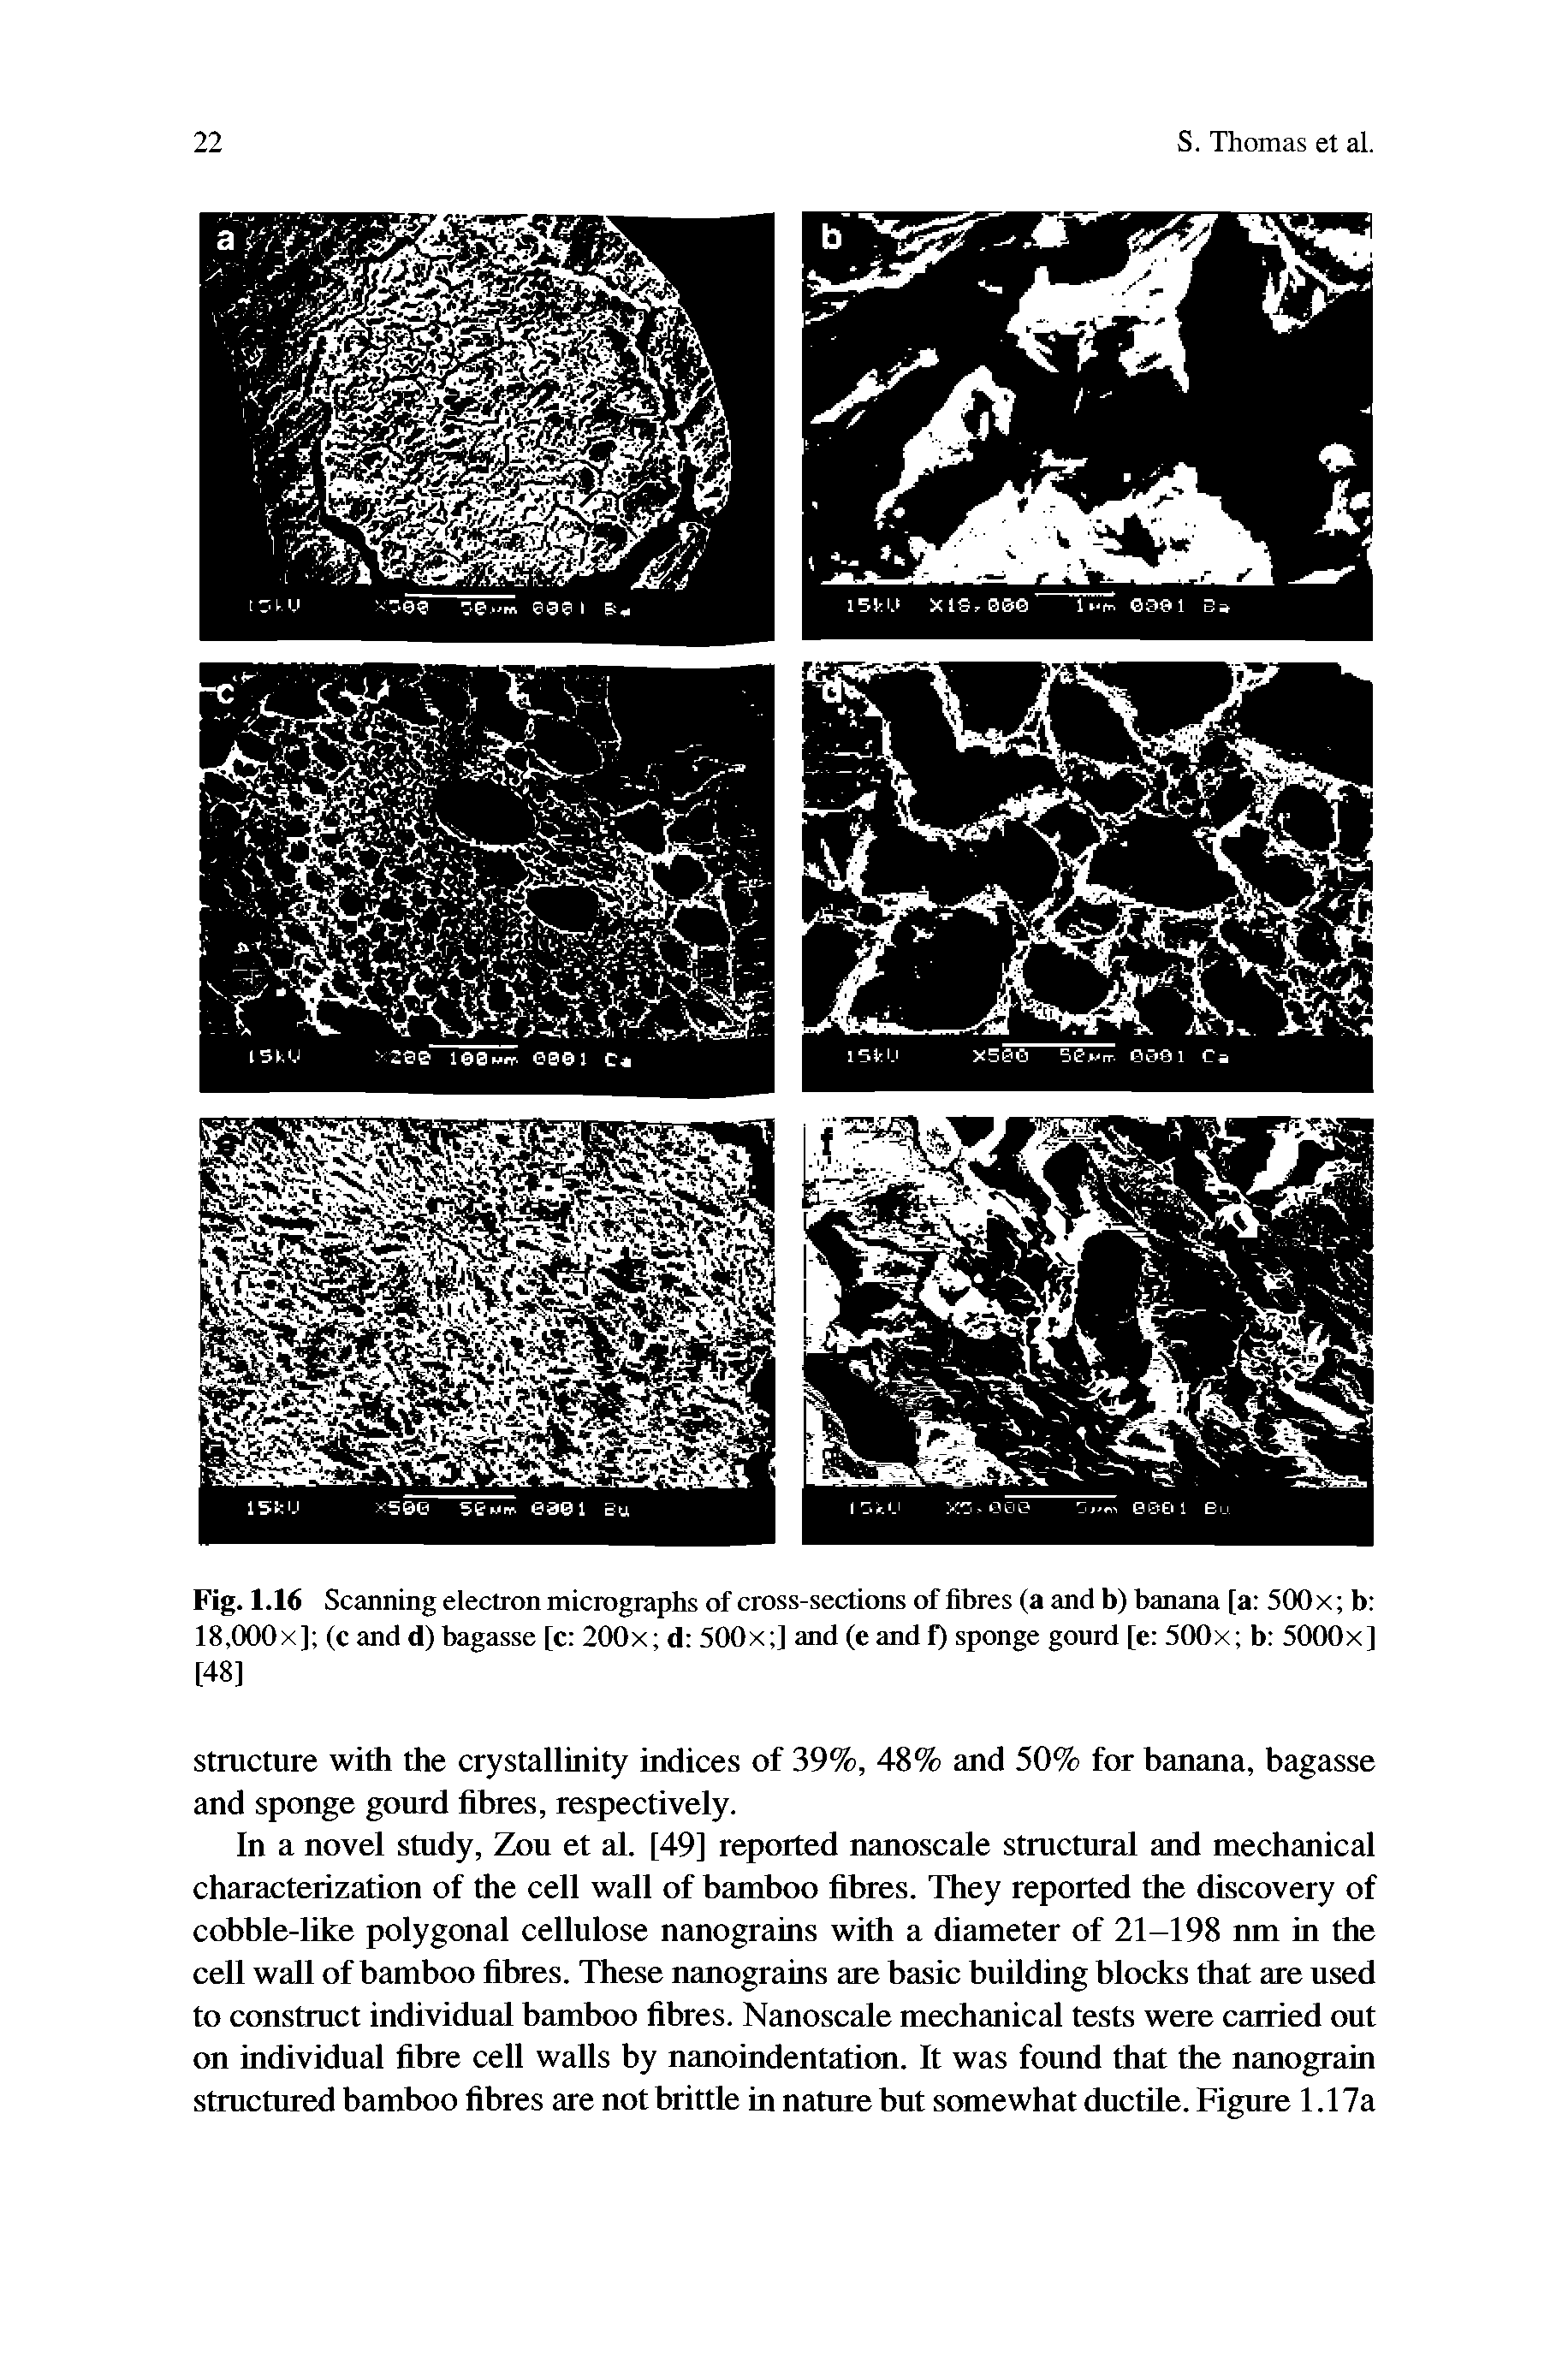 Fig. 1.16 Scanning electron micrographs of cross-sections of fibres (a and b) banana [a 500x b 18,000x] (C and d) bagasse [c 200x d 500x ] and (e and f) sponge gourd [e 500x b 5000x] [48]...